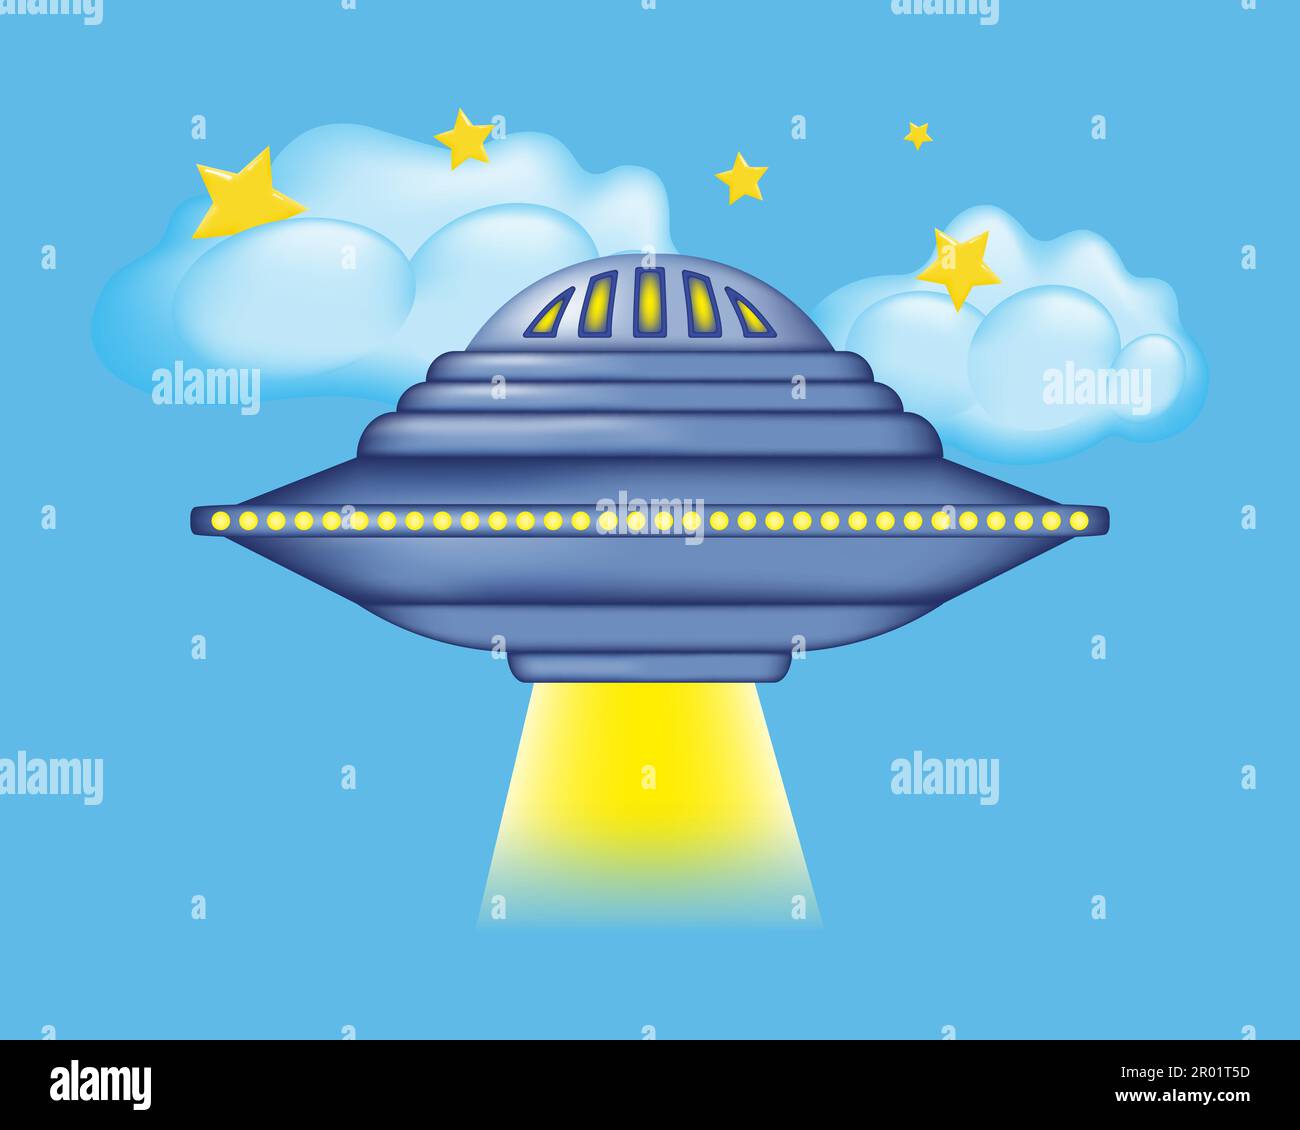 UFO on the background of clouds and stars 3d in cartoon style. A flying saucer with a yellow light takes off against the background of the starry sky. Stock Vector